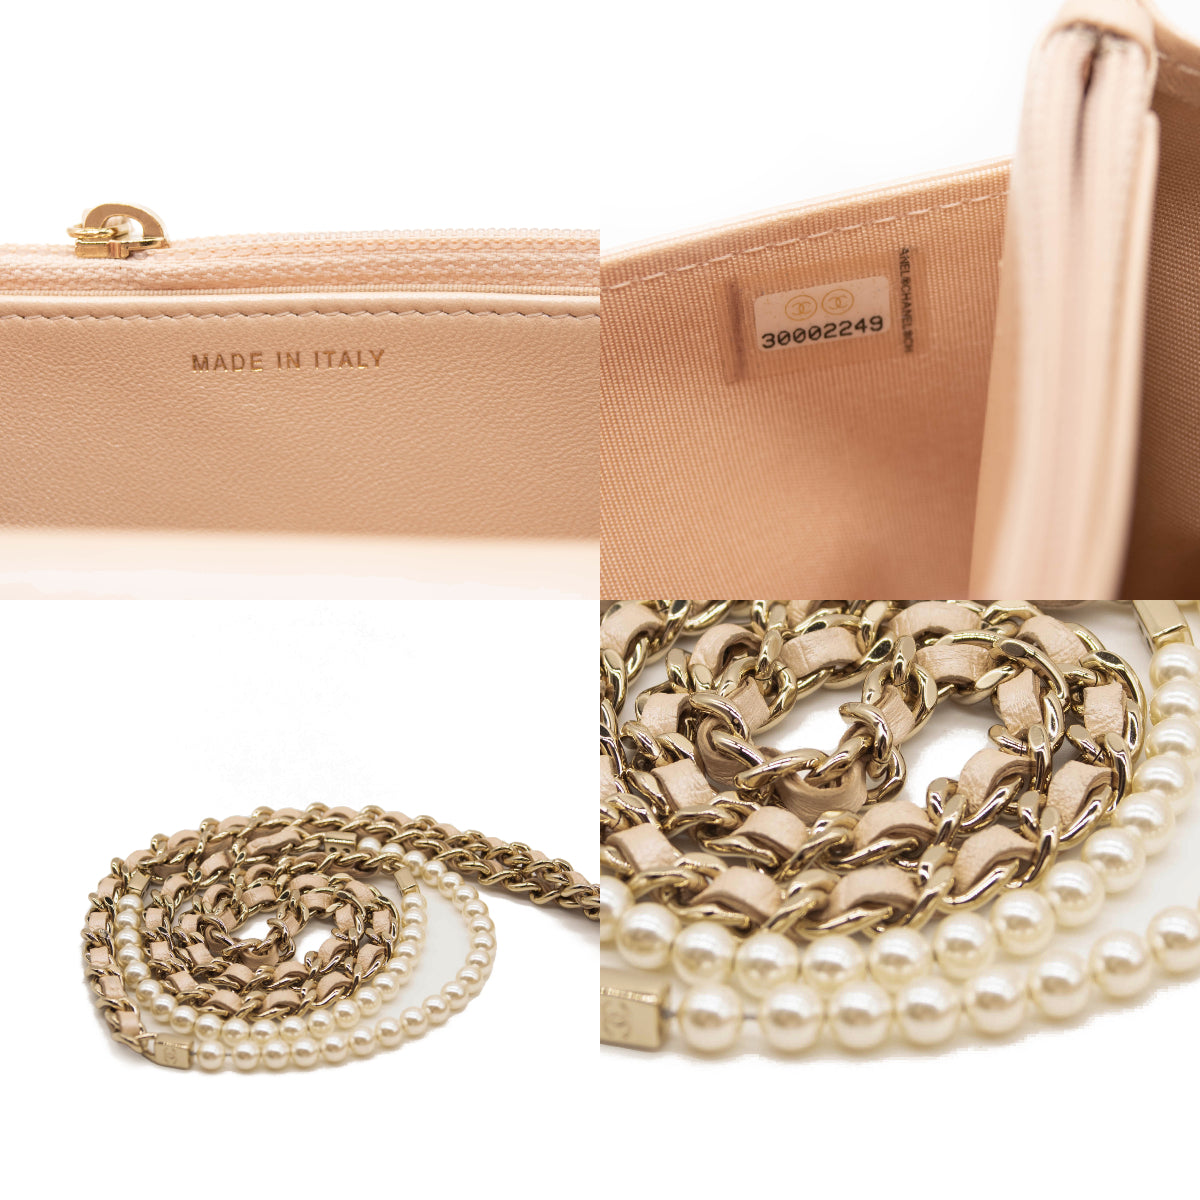 Chanel Iridescent Lambskin Quilted Pearl Wallet On Chain WOC